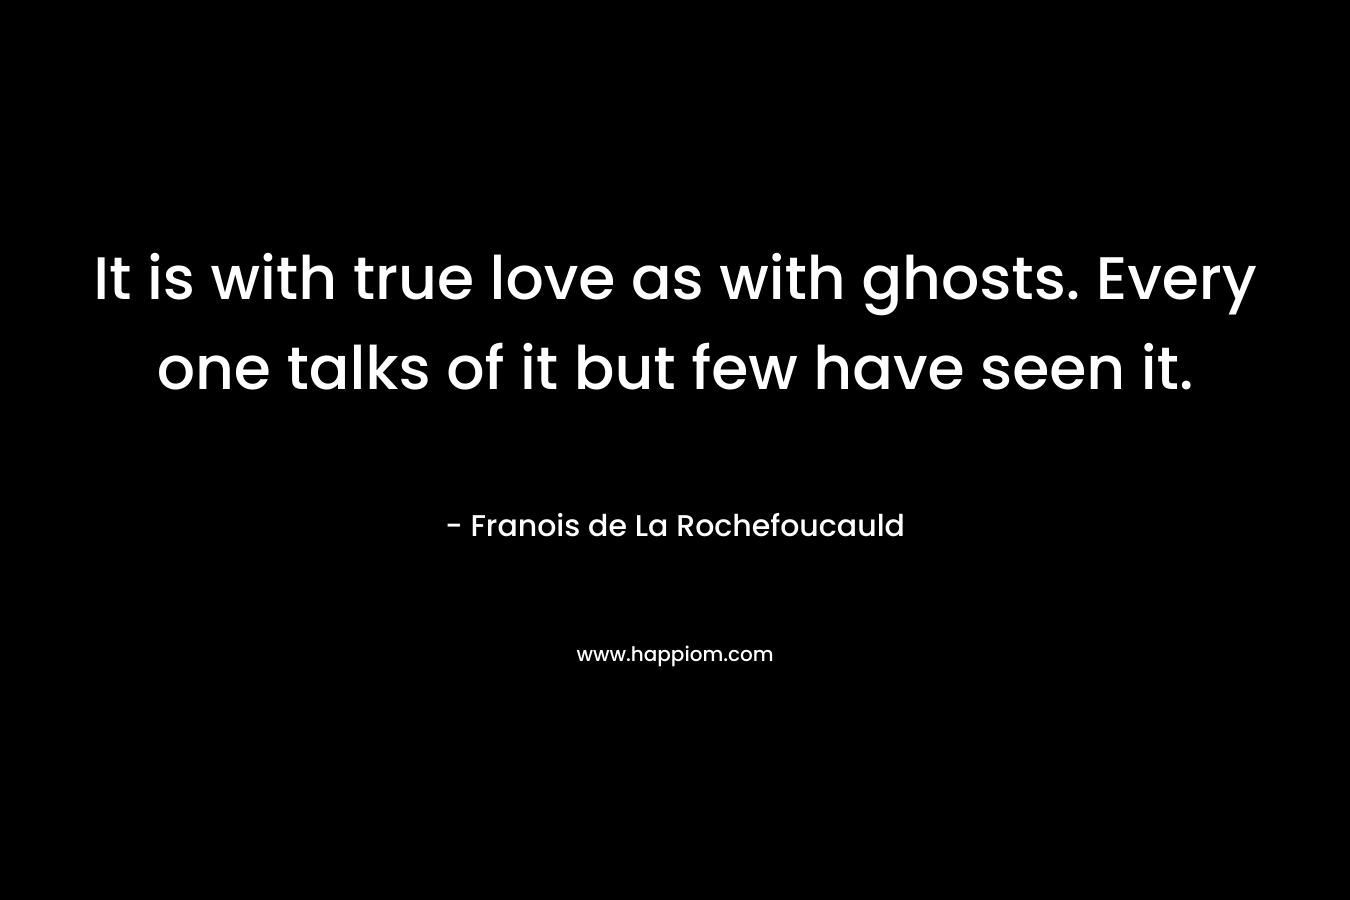 It is with true love as with ghosts. Every one talks of it but few have seen it.